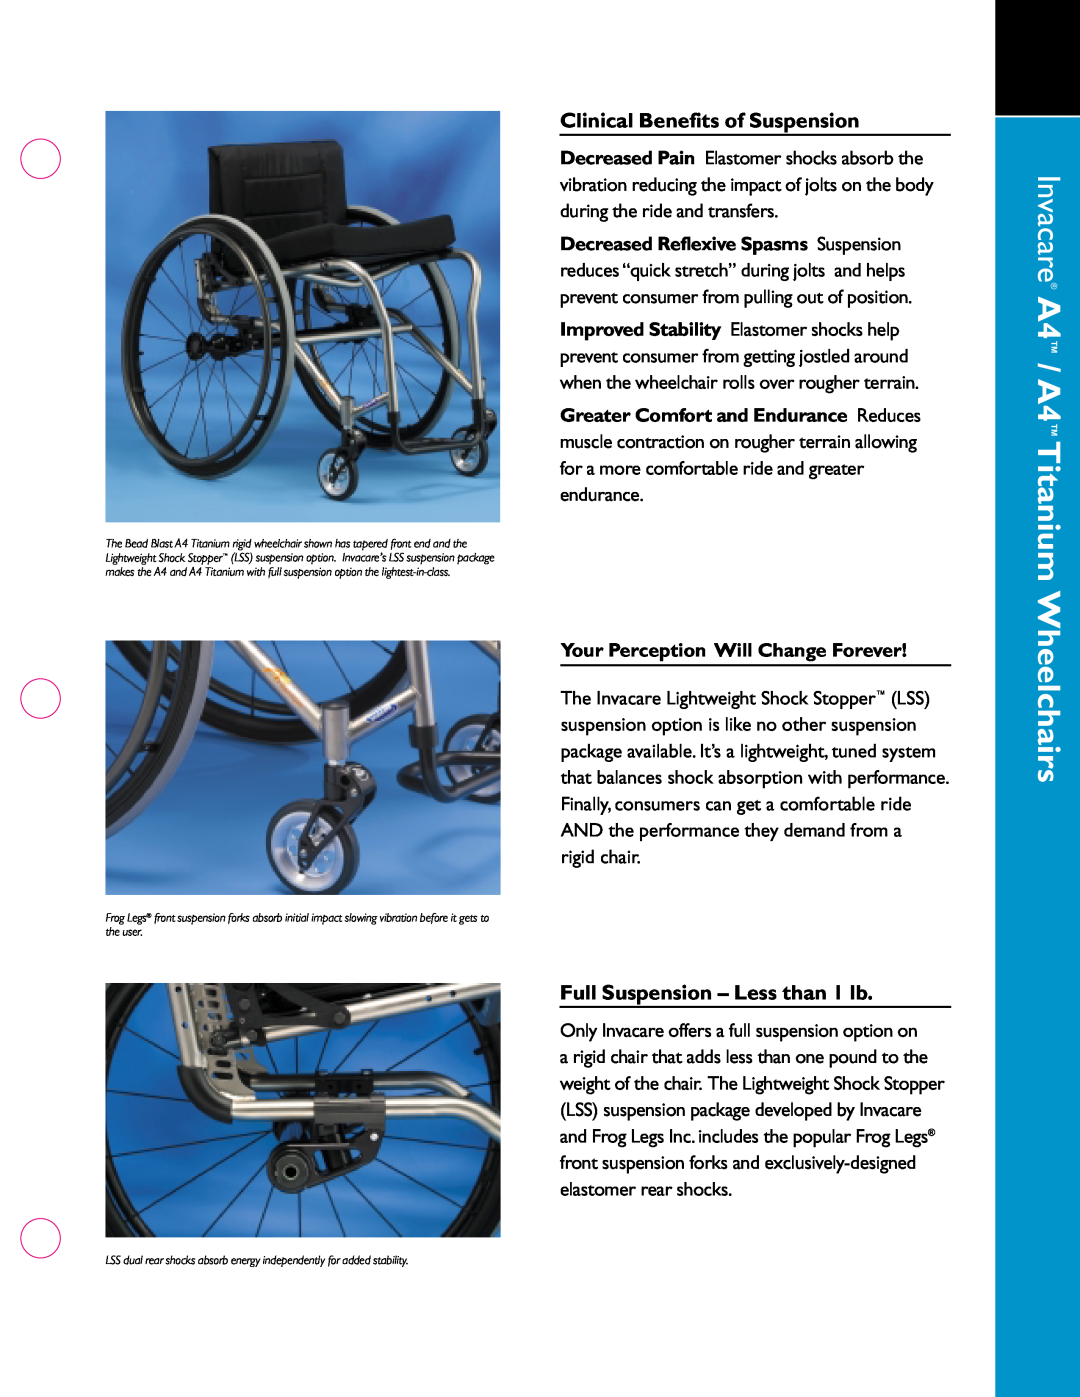 Invacare A4TM Invacare A4 / A4 Titanium, Wheelchairs, Clinical Benefits of Suspension, Full Suspension - Less than 1 lb 